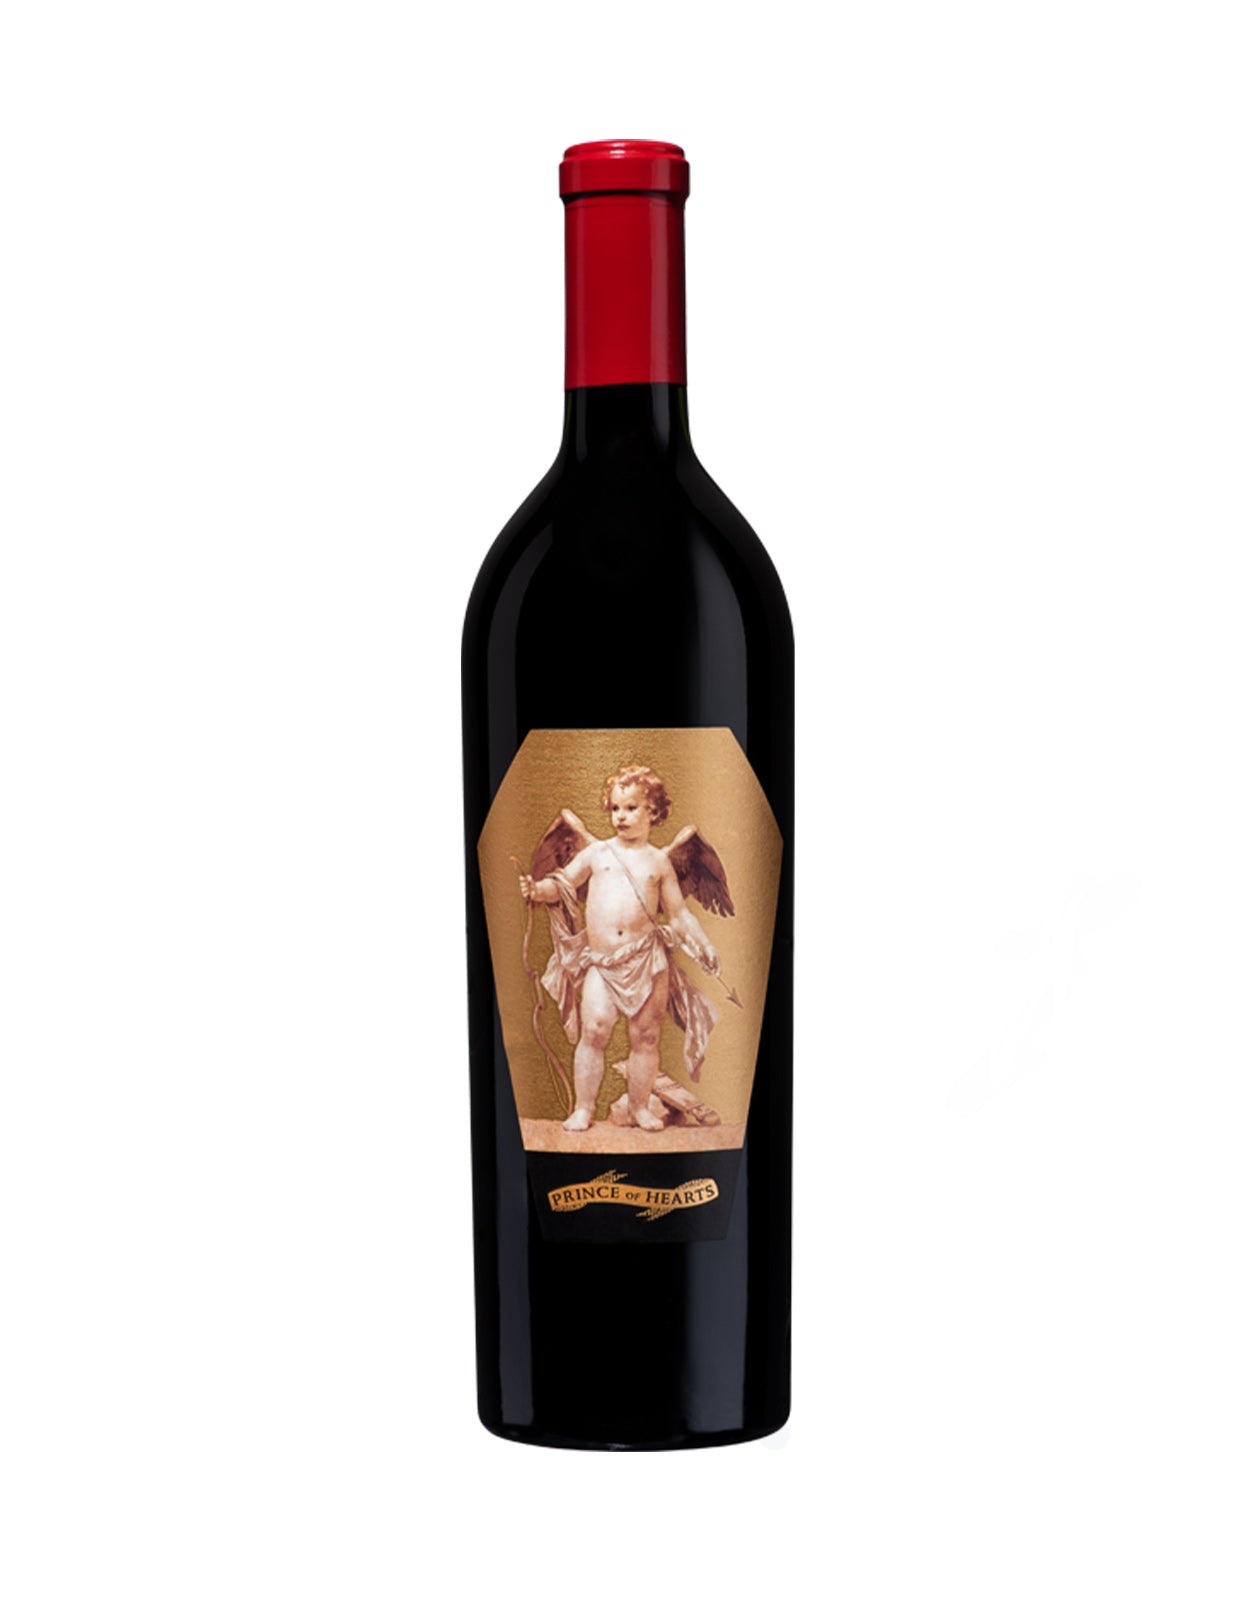 Blankiet Prince of Hearts Napa Valley Red Blend 2018